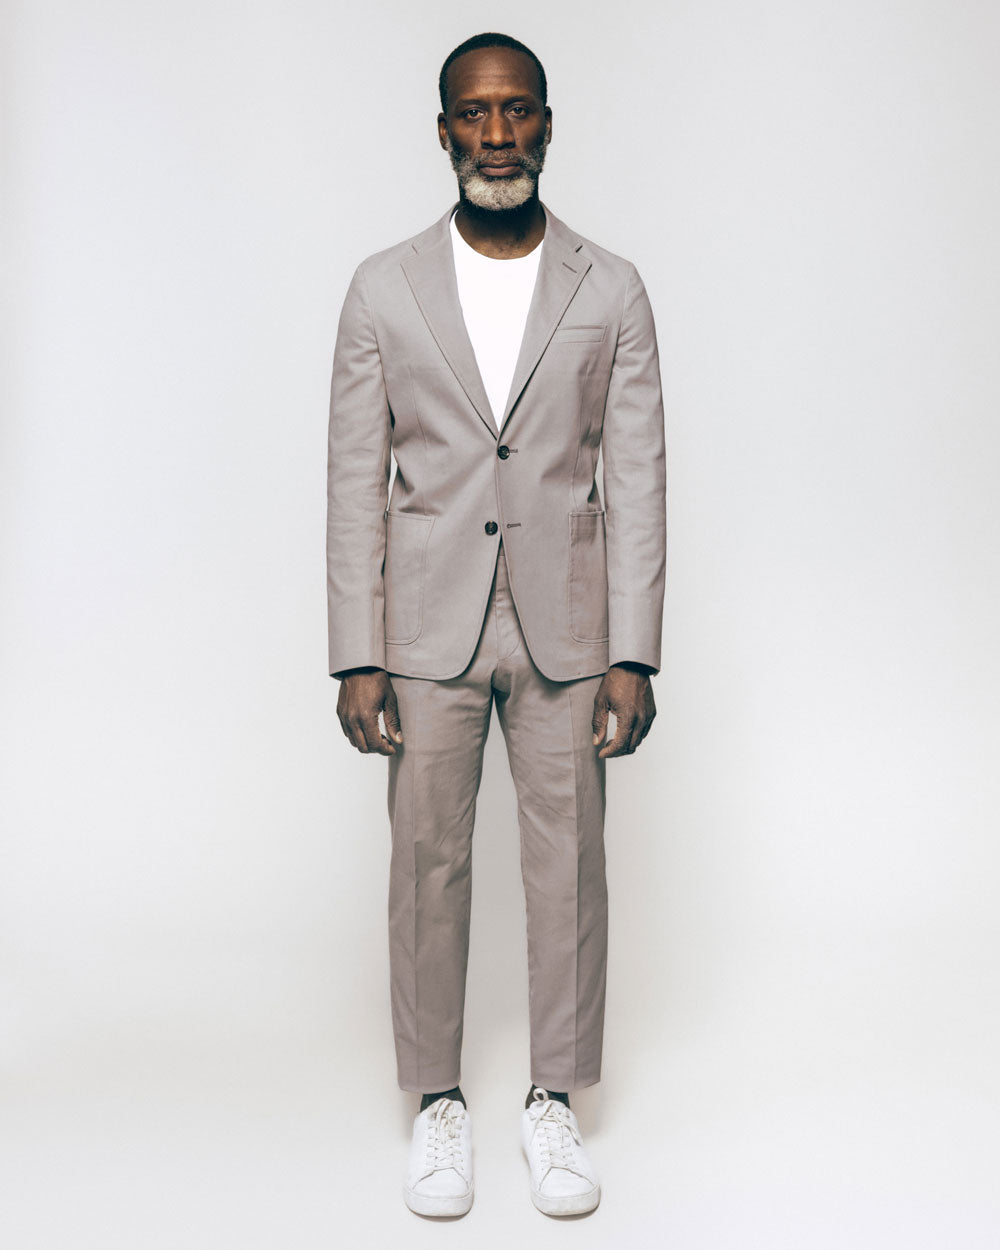 Man with light grey greenflex suit